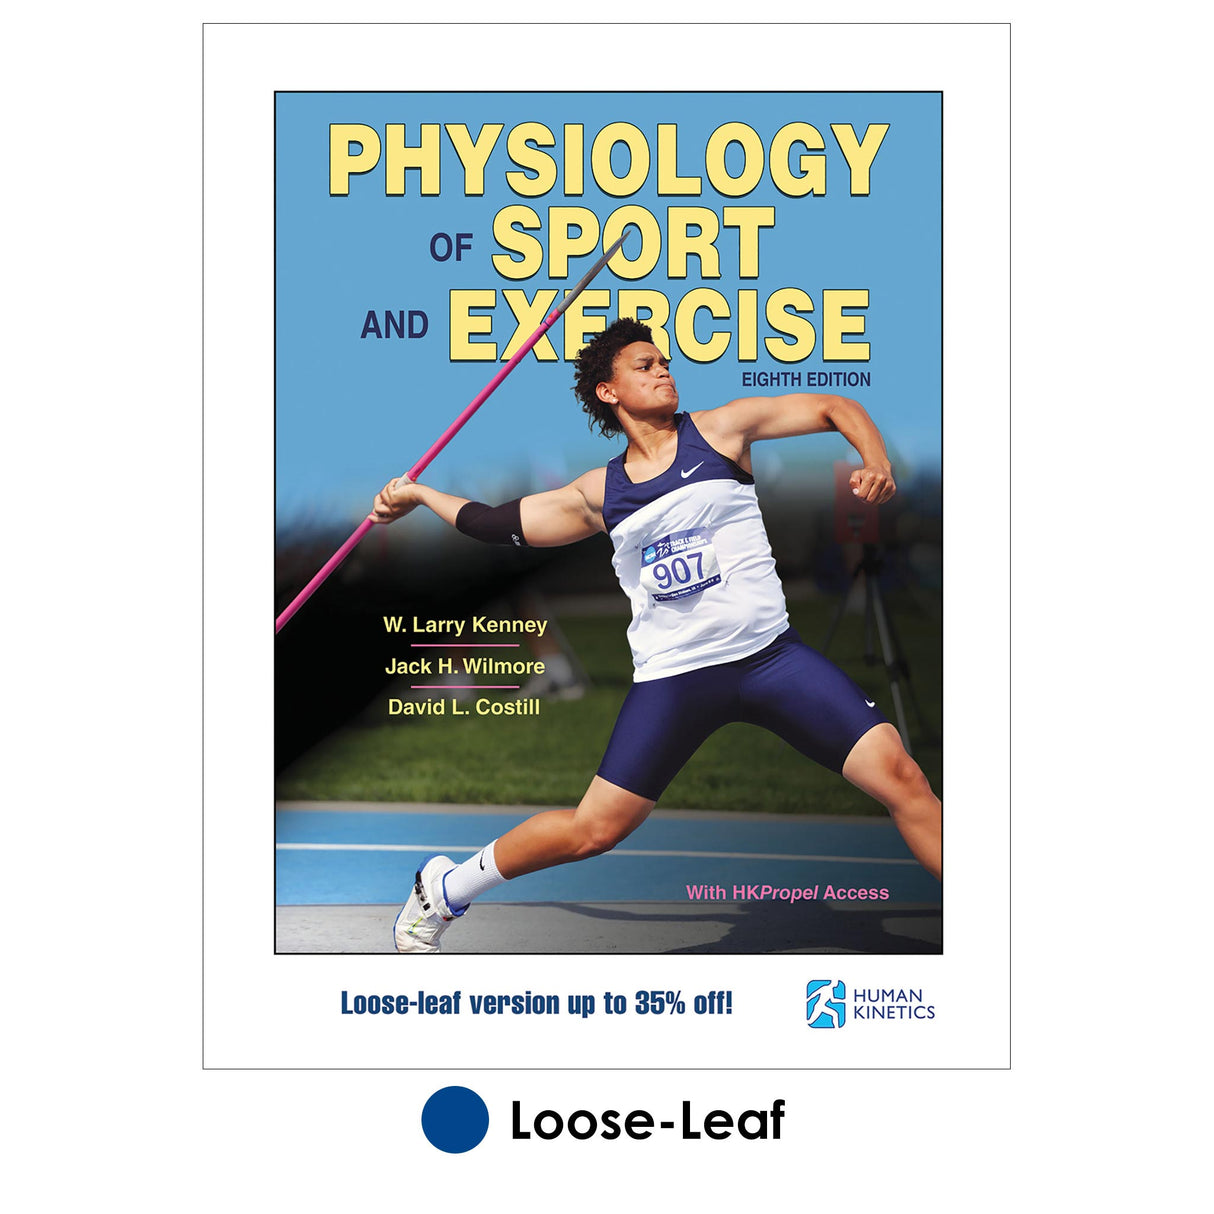 Physiology of Sport and Exercise 8th Edition With HKPropel Access- Loose-Leaf Edition